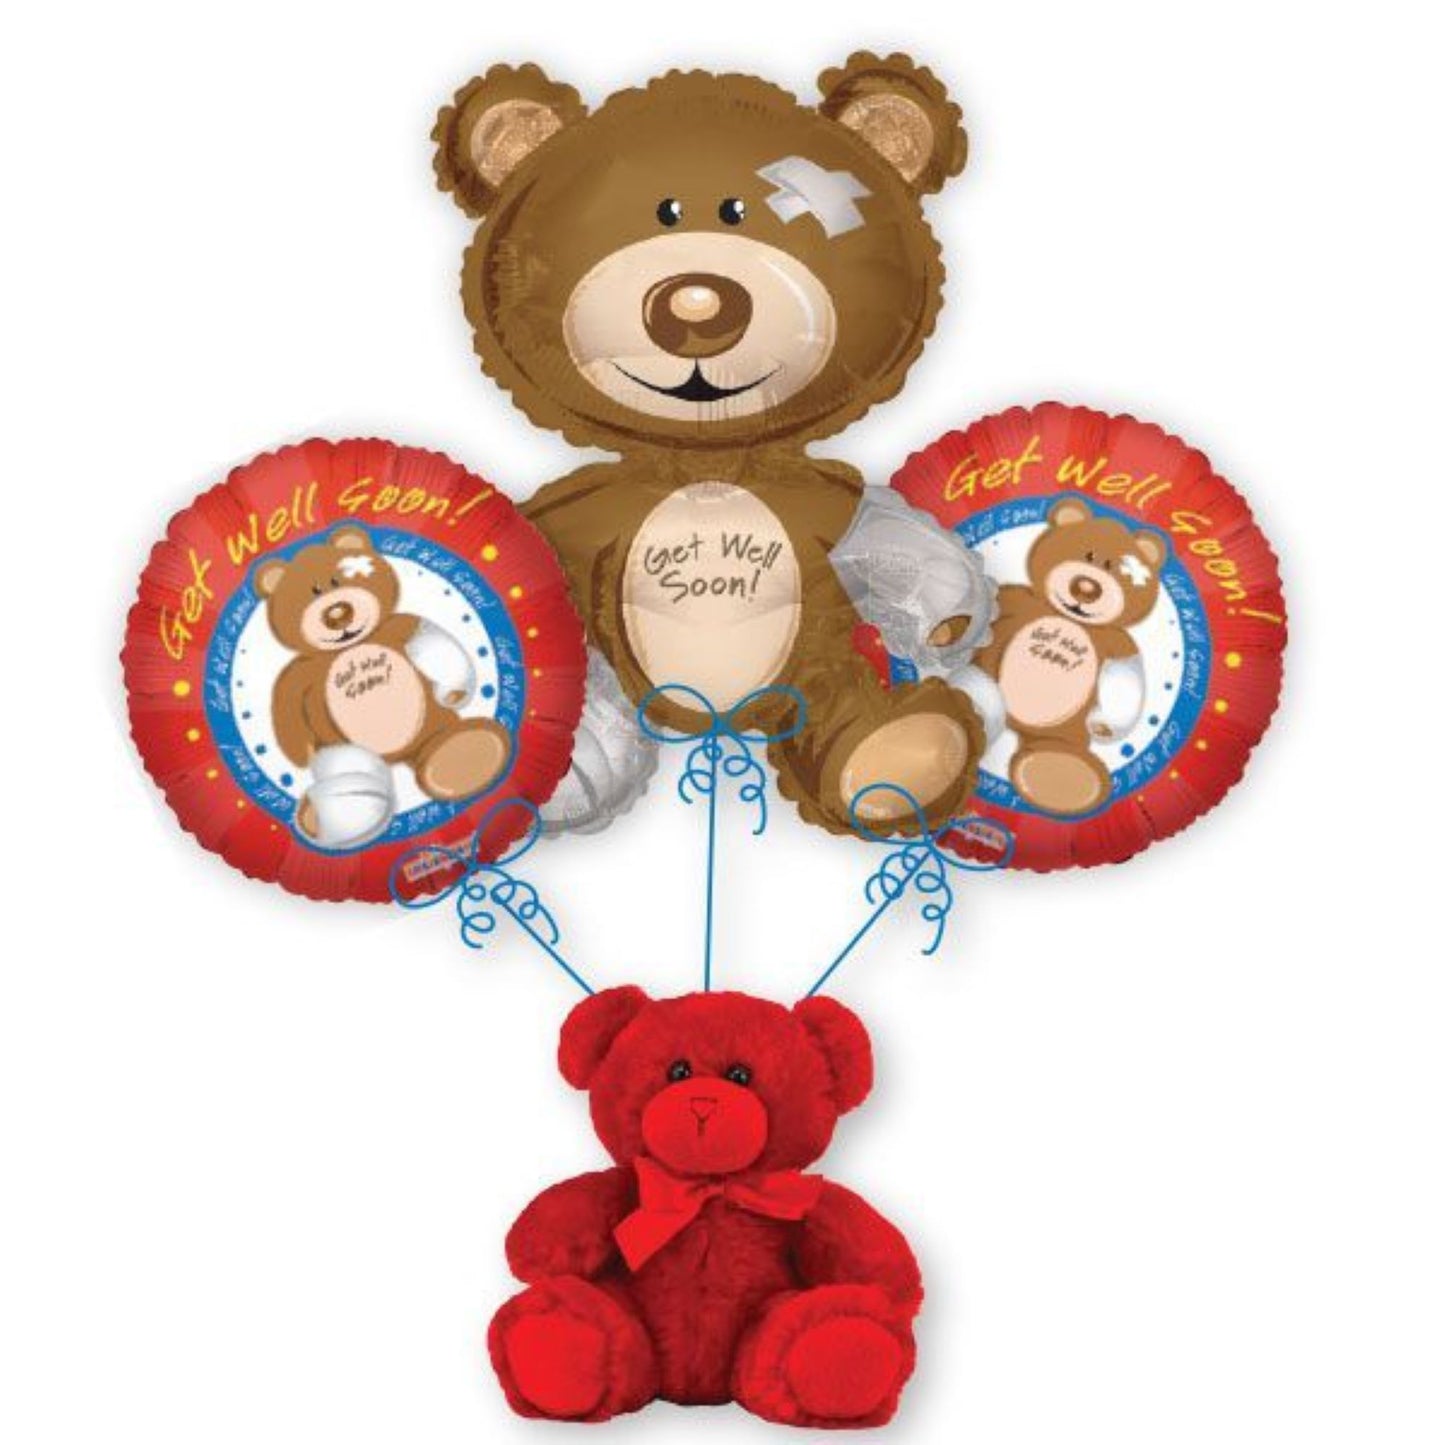 Get well Balloon Bouquet with Teddy bear